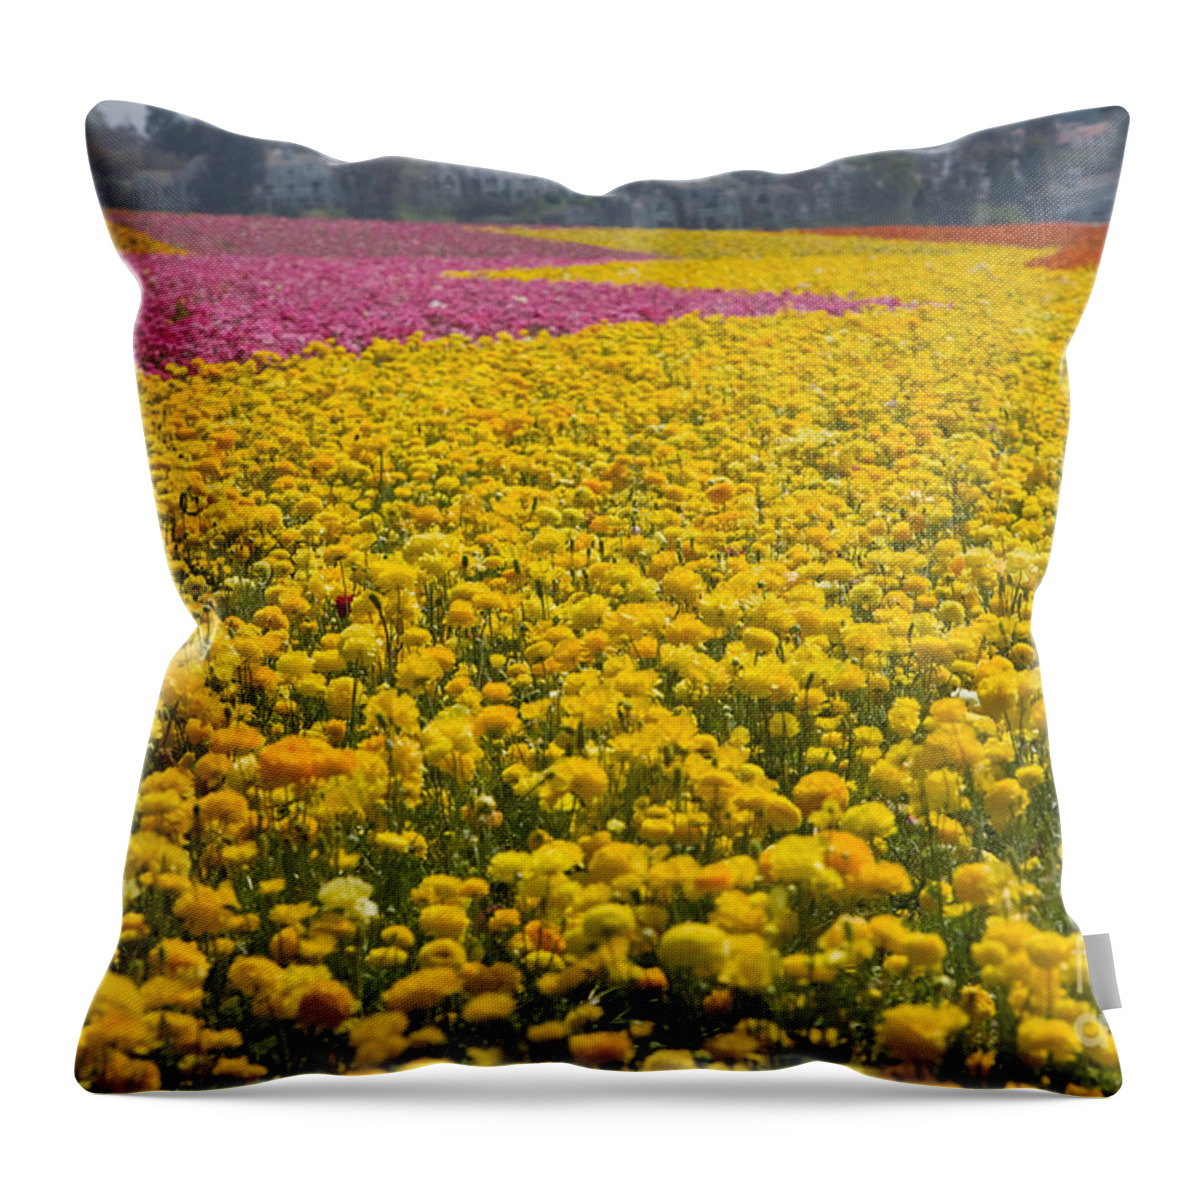 Flower Fields Throw Pillow featuring the photograph Knighton009 by Daniel Knighton